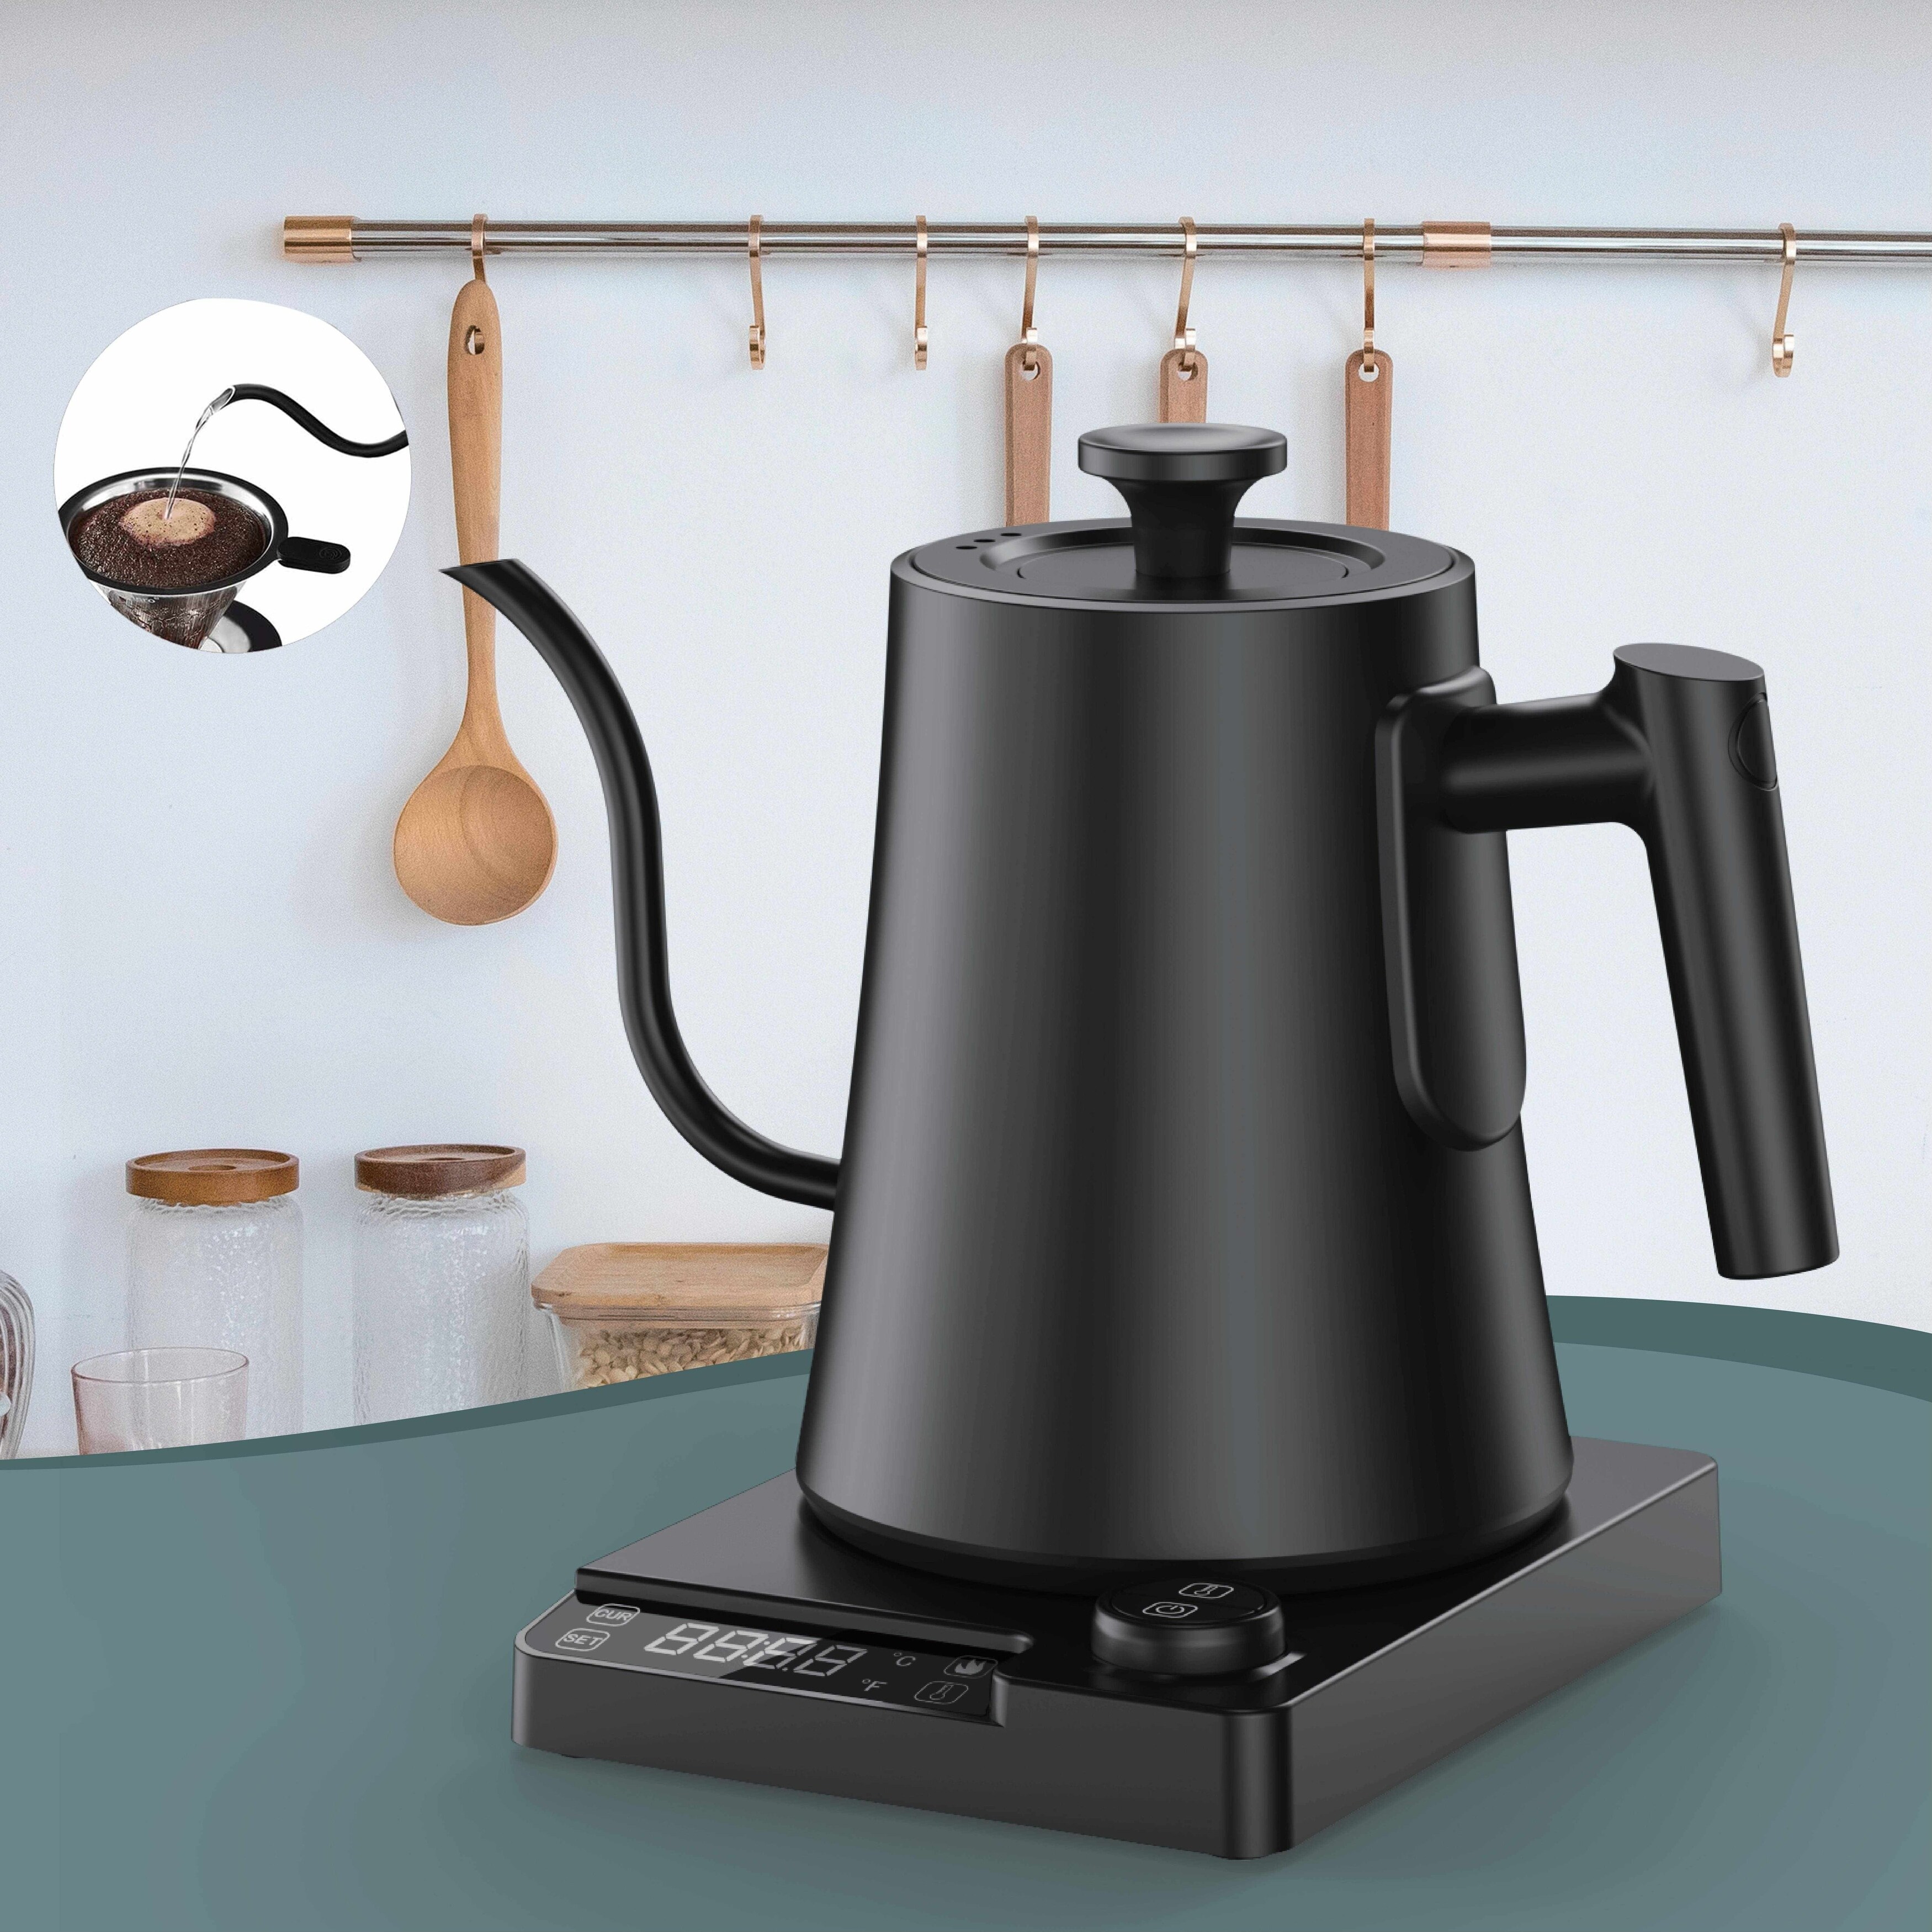 https://ak1.ostkcdn.com/images/products/is/images/direct/2bc66922ed42eac1e2101c1f09638a49eb0b3332/1pc-Electric-Kettle-Gooseneck-With-Temperature-Control%2C-Electric-Tea-%26-Pour-Over-Coffee.jpg